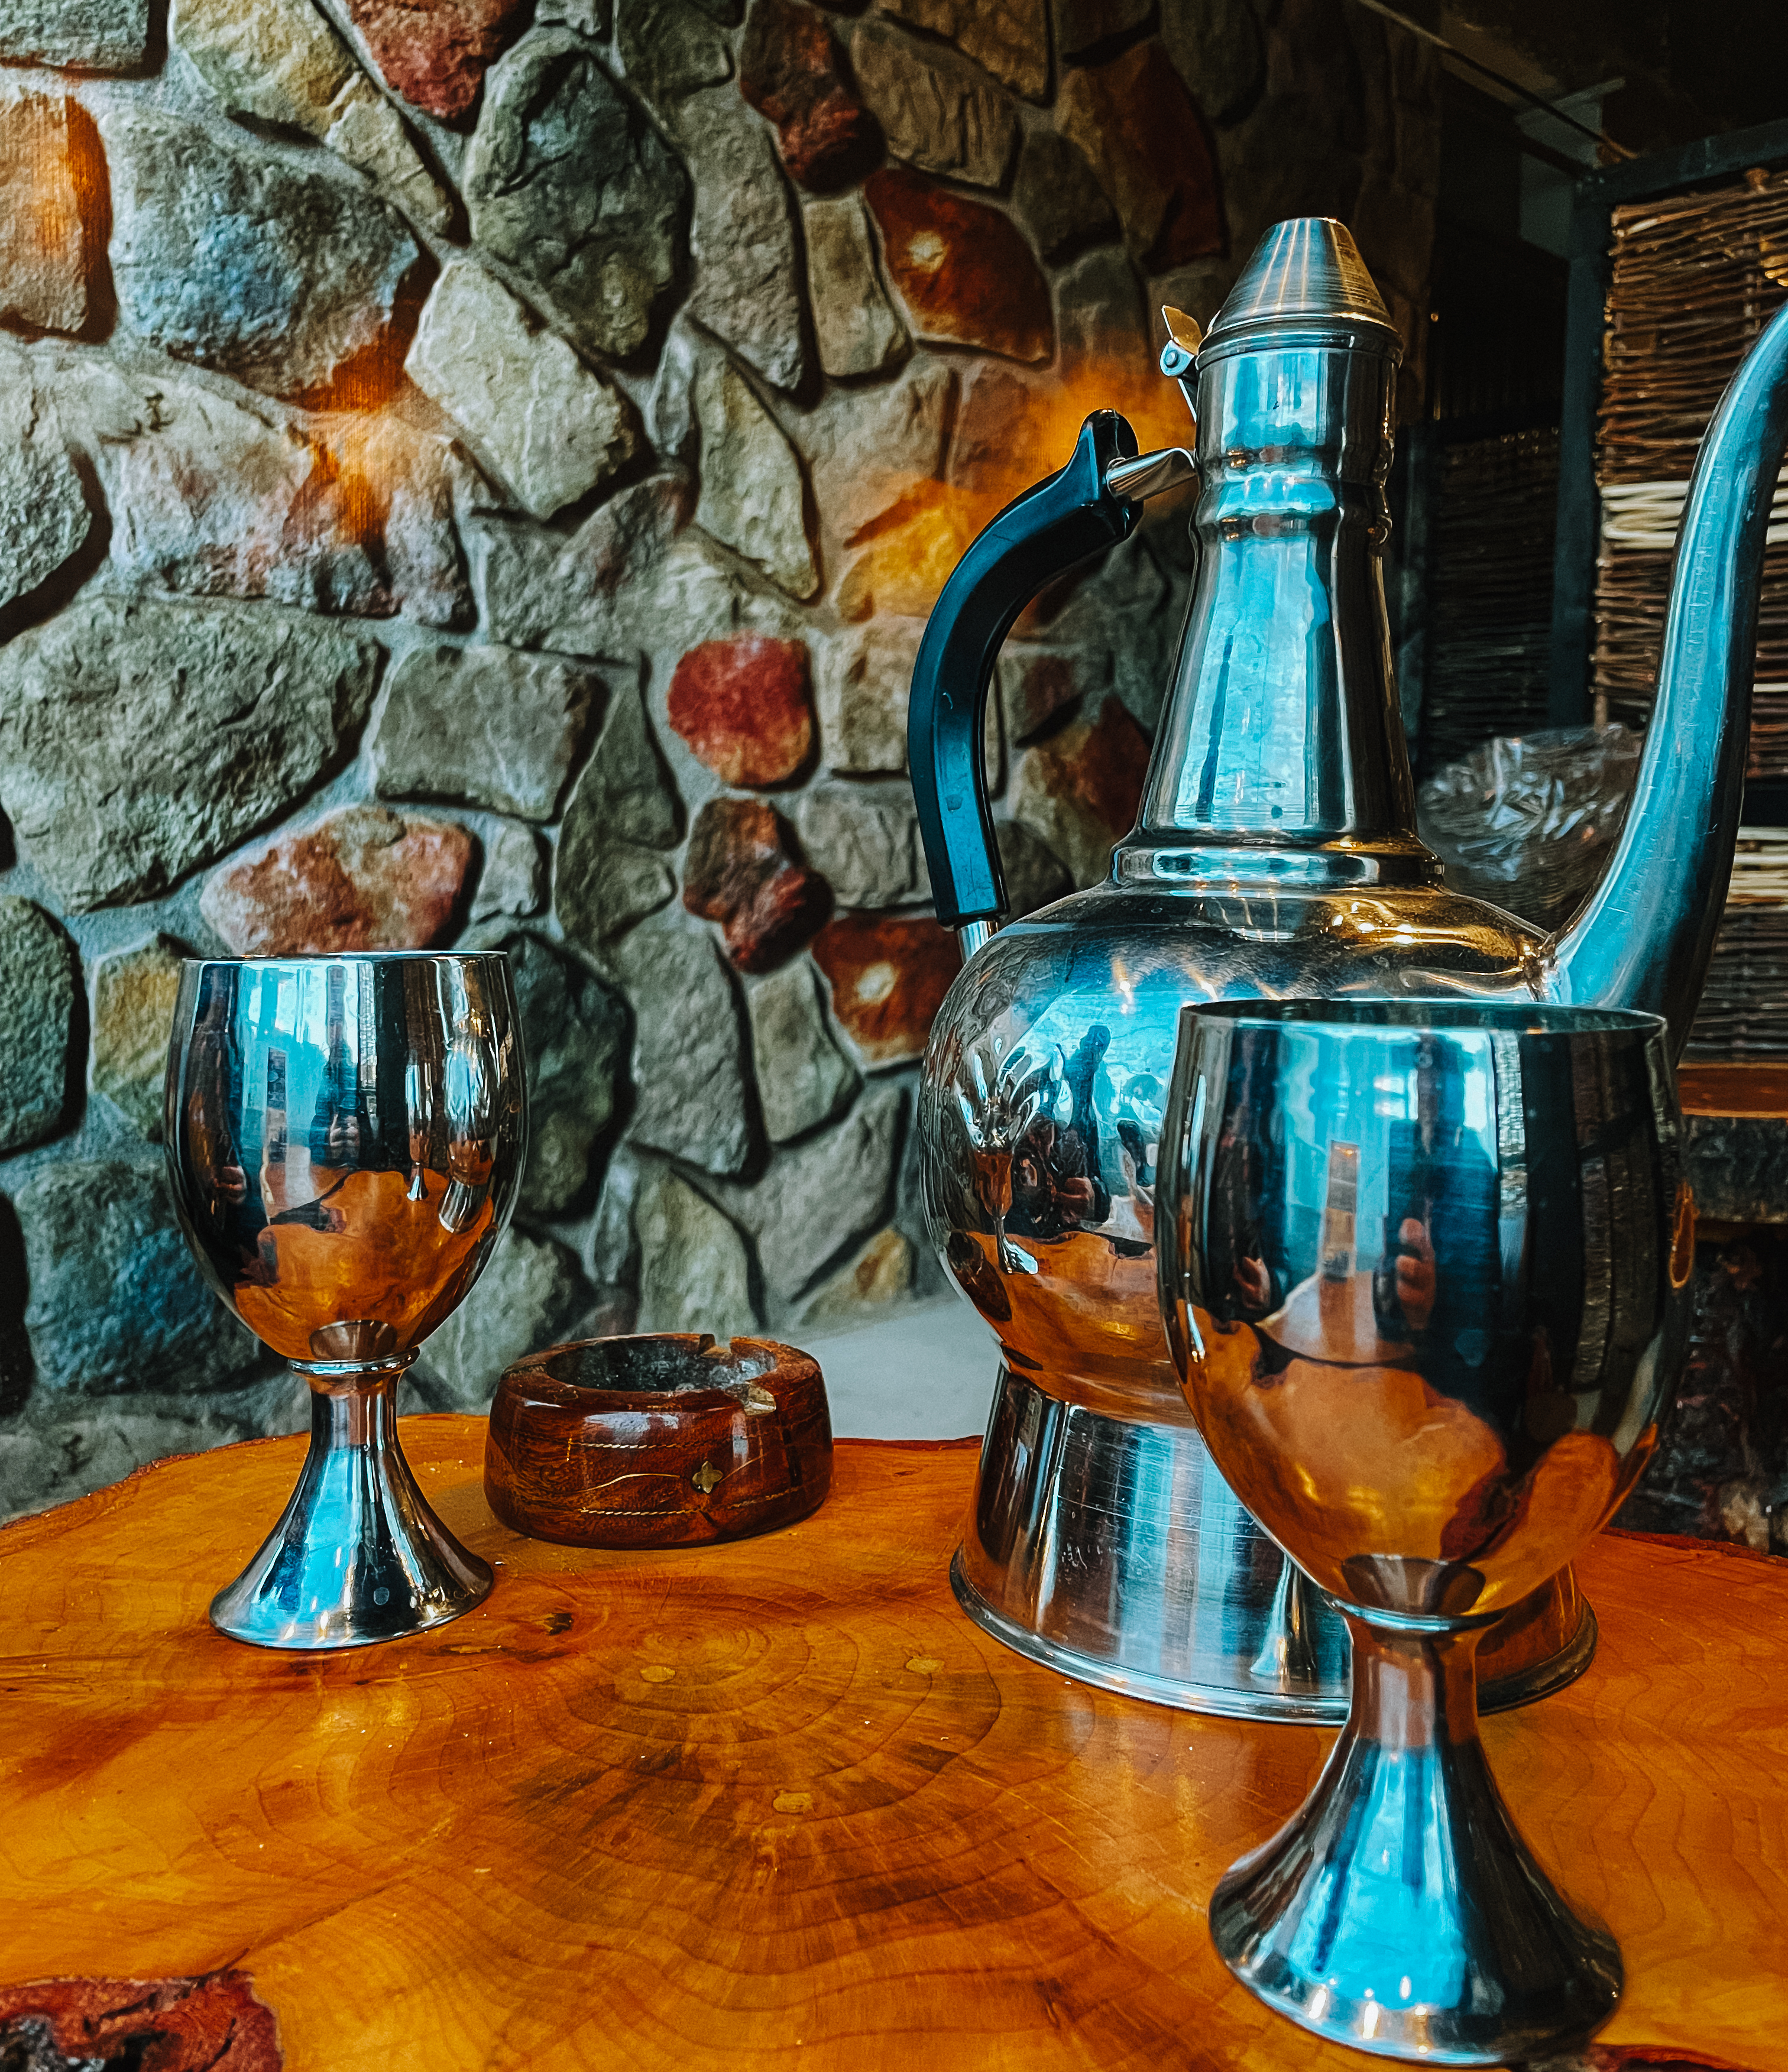 Traditional glasses of the Balti people in Skardu, Pakistan